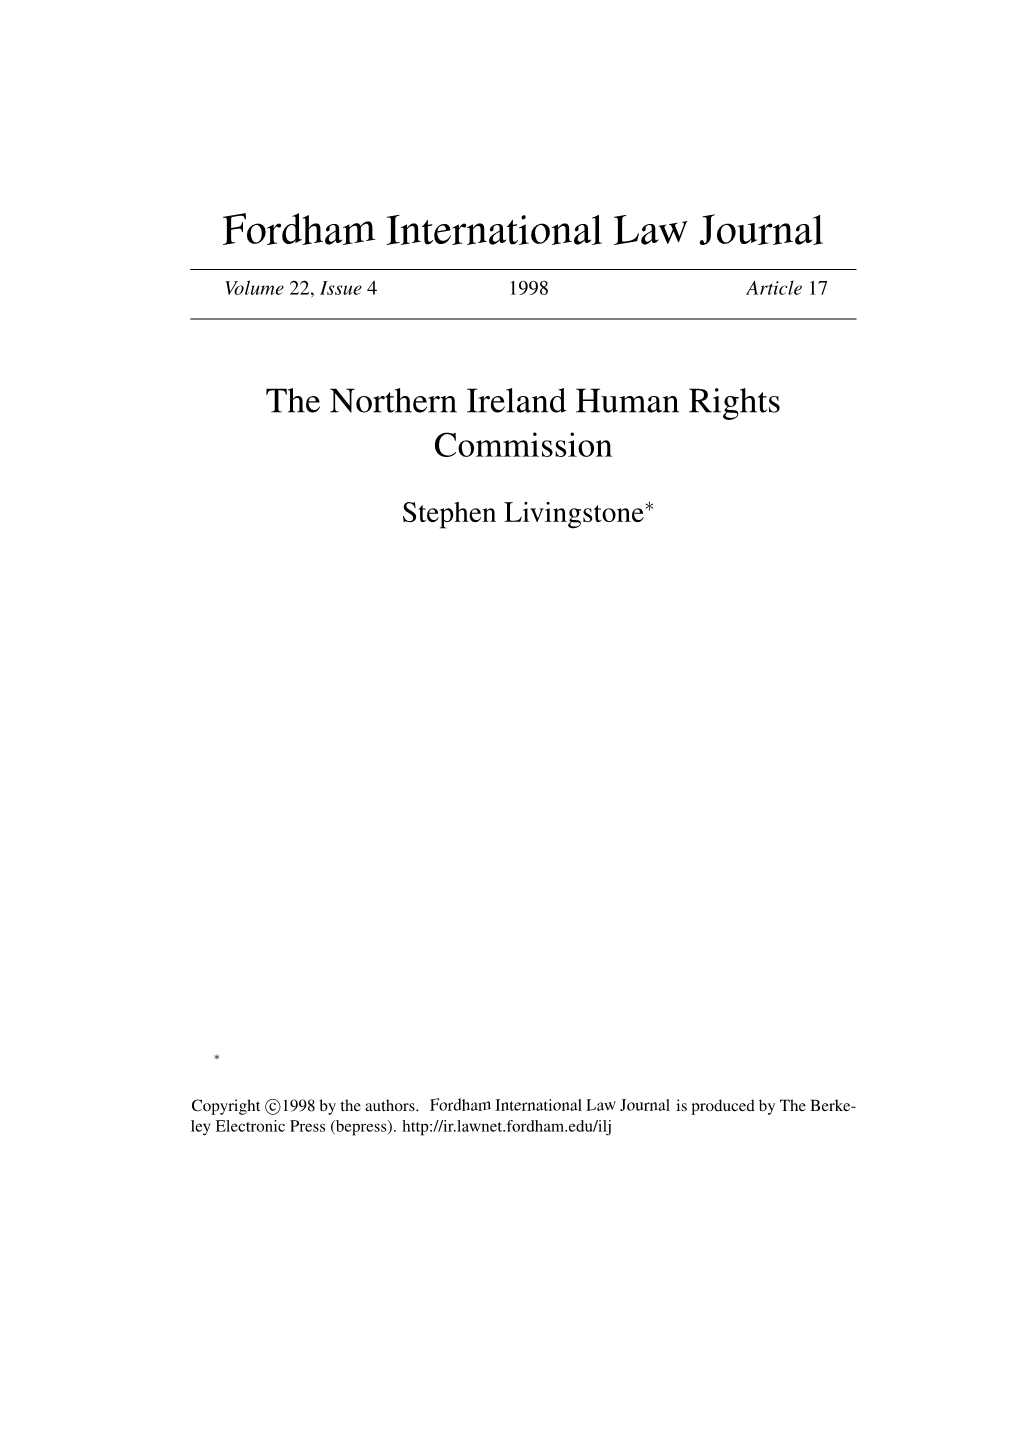 The Northern Ireland Human Rights Commission